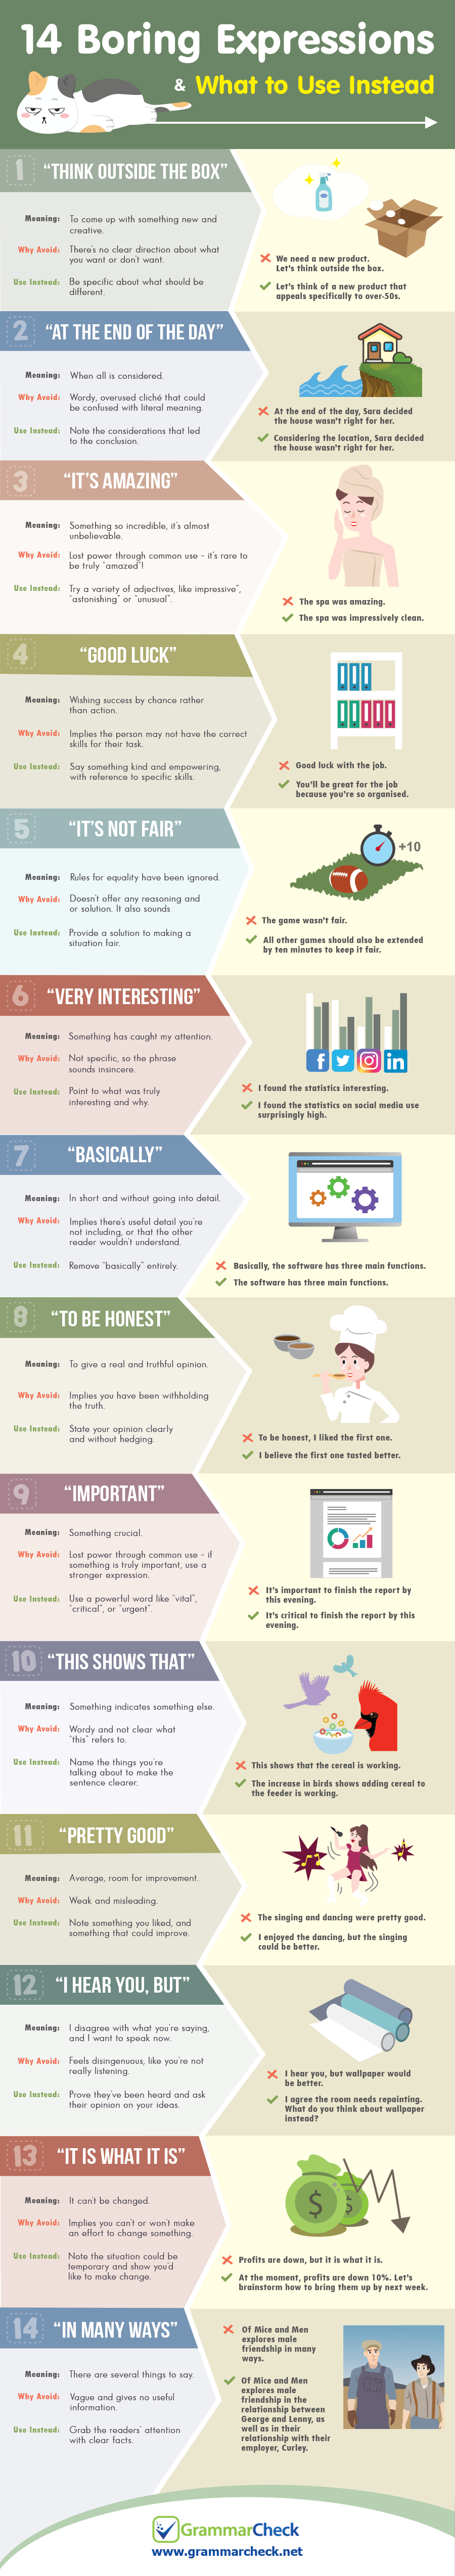 14 Boring Expressions & What to Use Instead (Infographic)